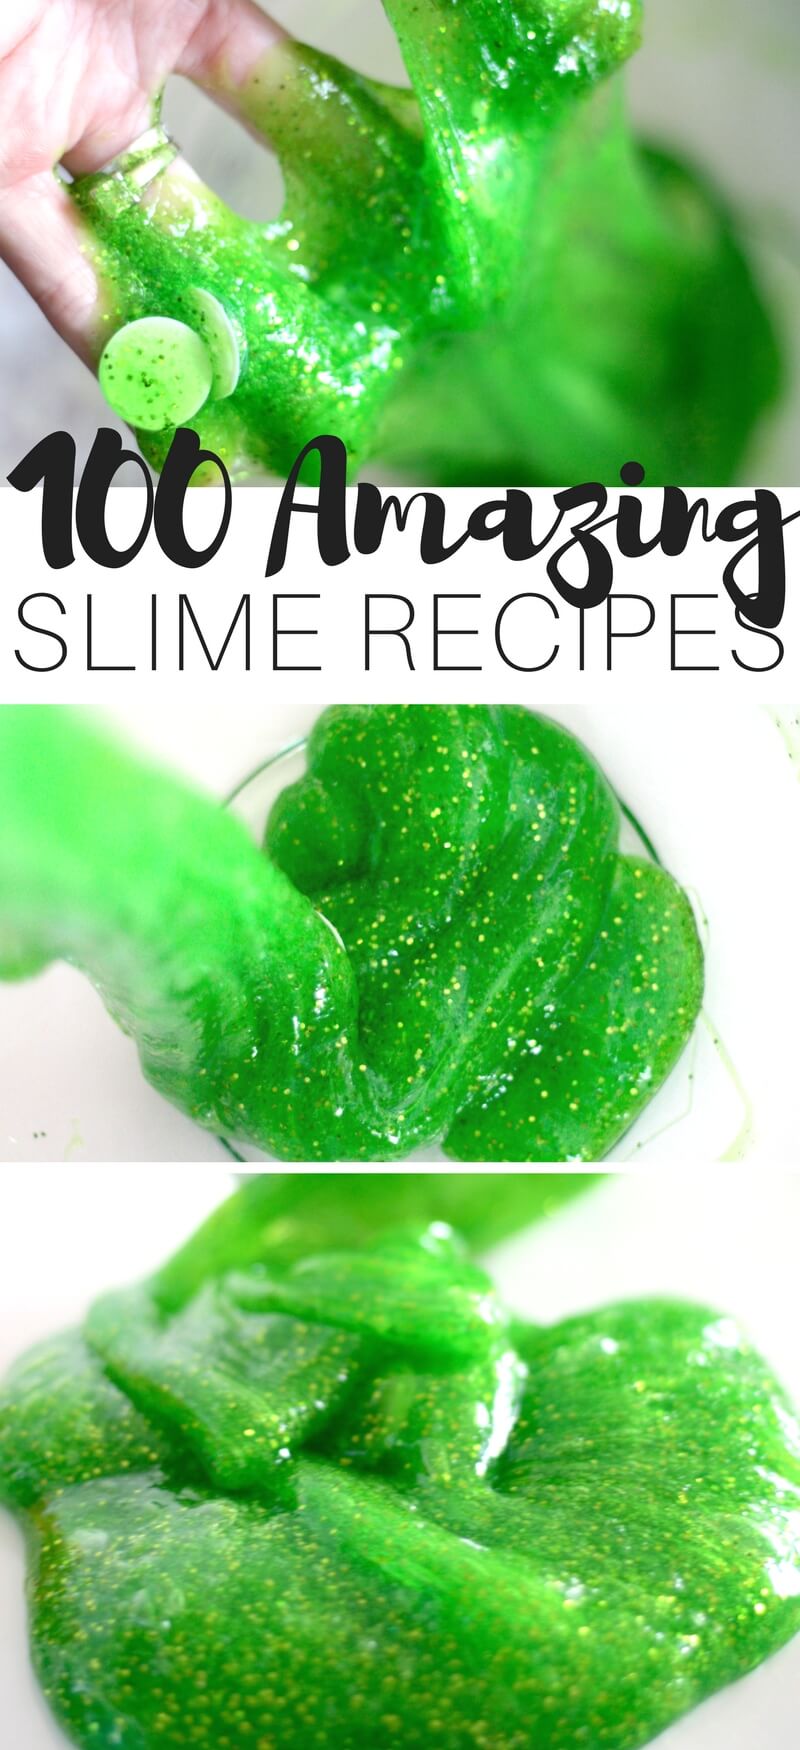 100 Amazing Ways To Make Slime Recipes for Kids To Try. Slime recipes perfect for kids science and kid sensory play. Make borax slime, saline slime, liquid starch slime, fluffy slime, homemade slime, and add tons of slime activities, themes and ideas for easy slime making fun all year round.